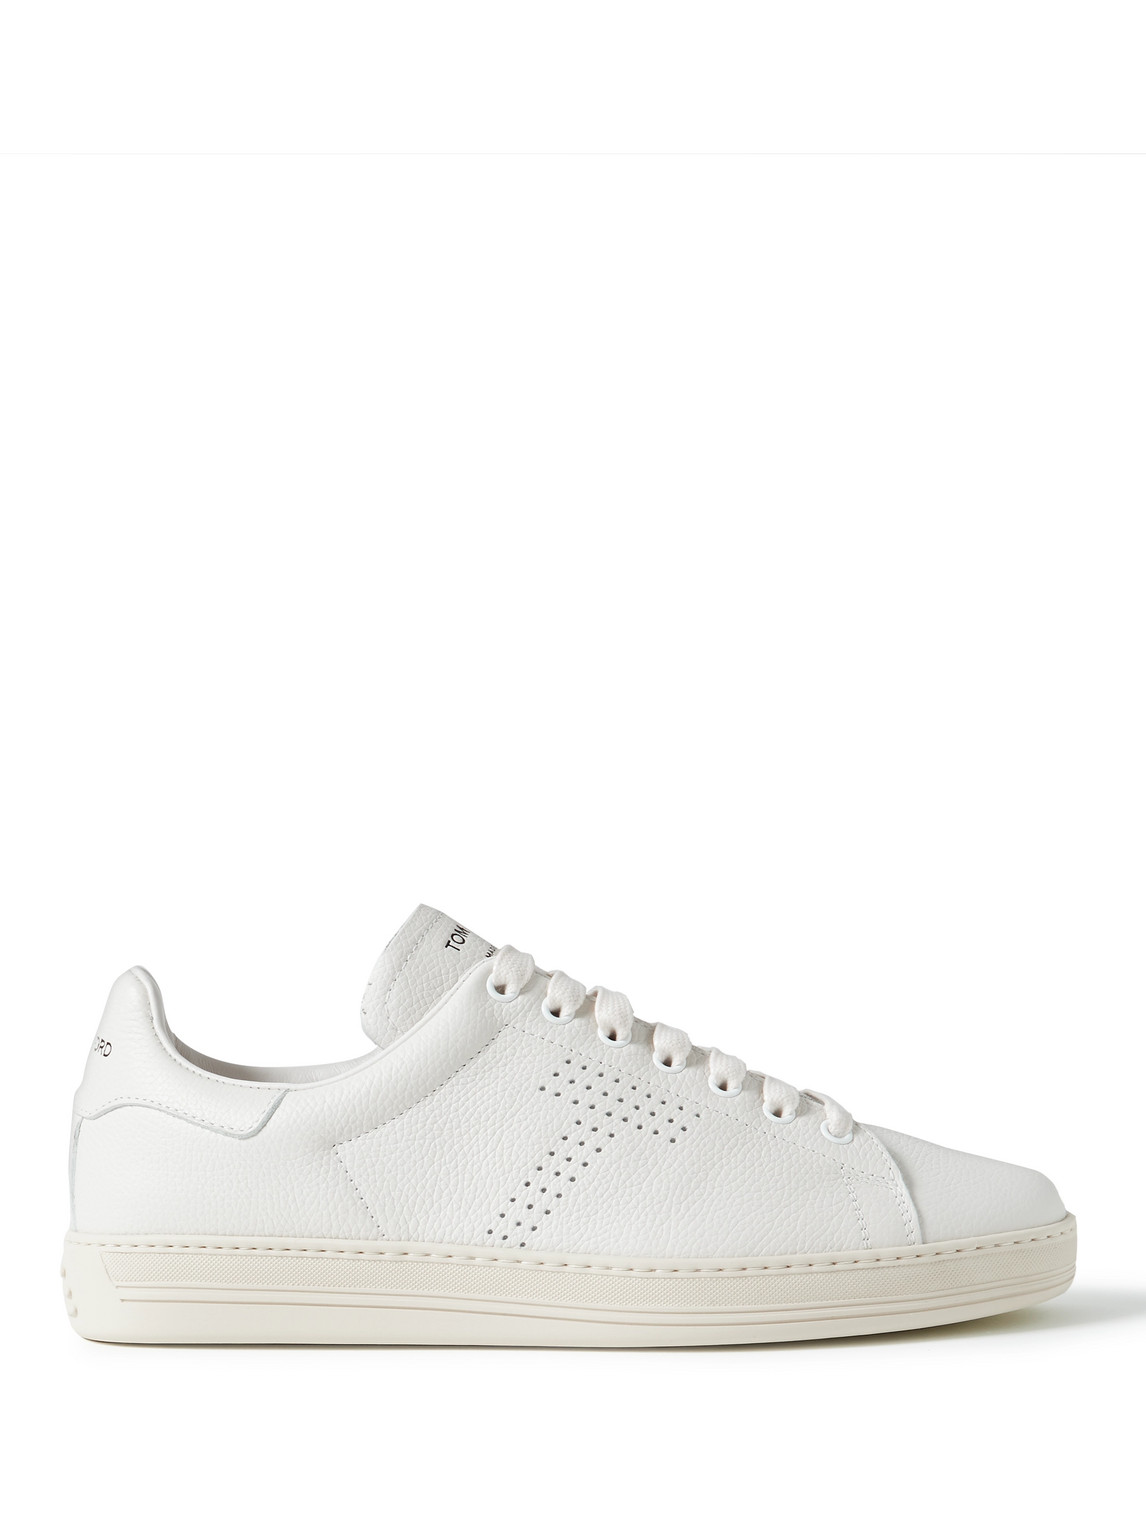 TOM FORD - Warwick Perforated Full-Grain Leather Sneakers - Men - Neutrals - UK 8 von TOM FORD